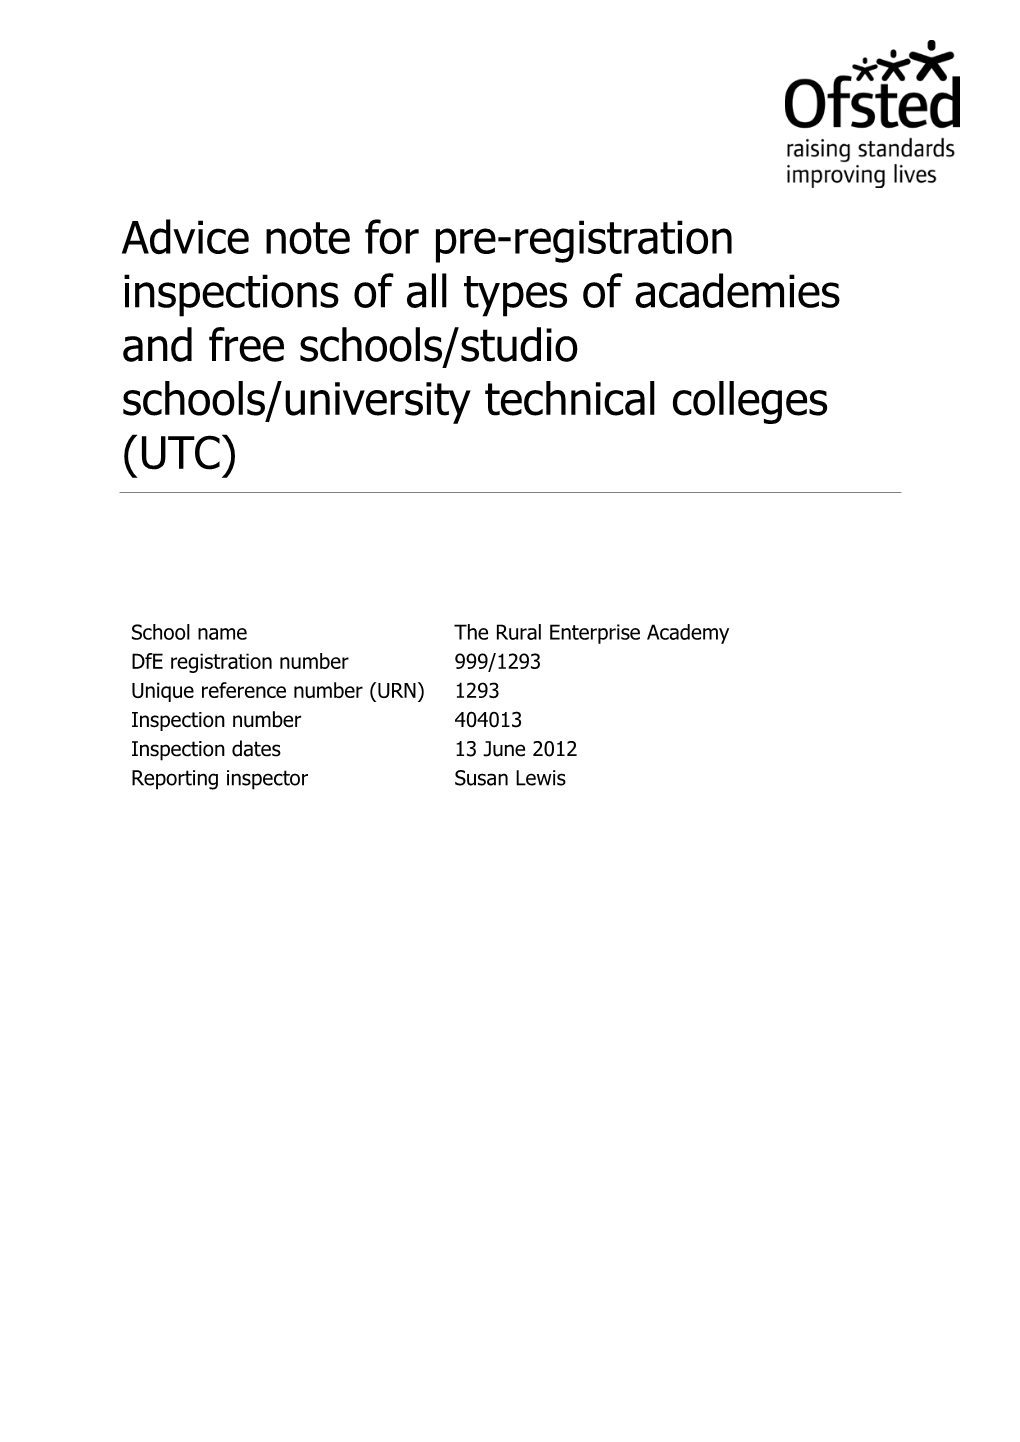 Advice Note for Pre-Registration Inspections of All Types of Academies and Free Schools/Studio Schools/University Technical Colleges (UTC)